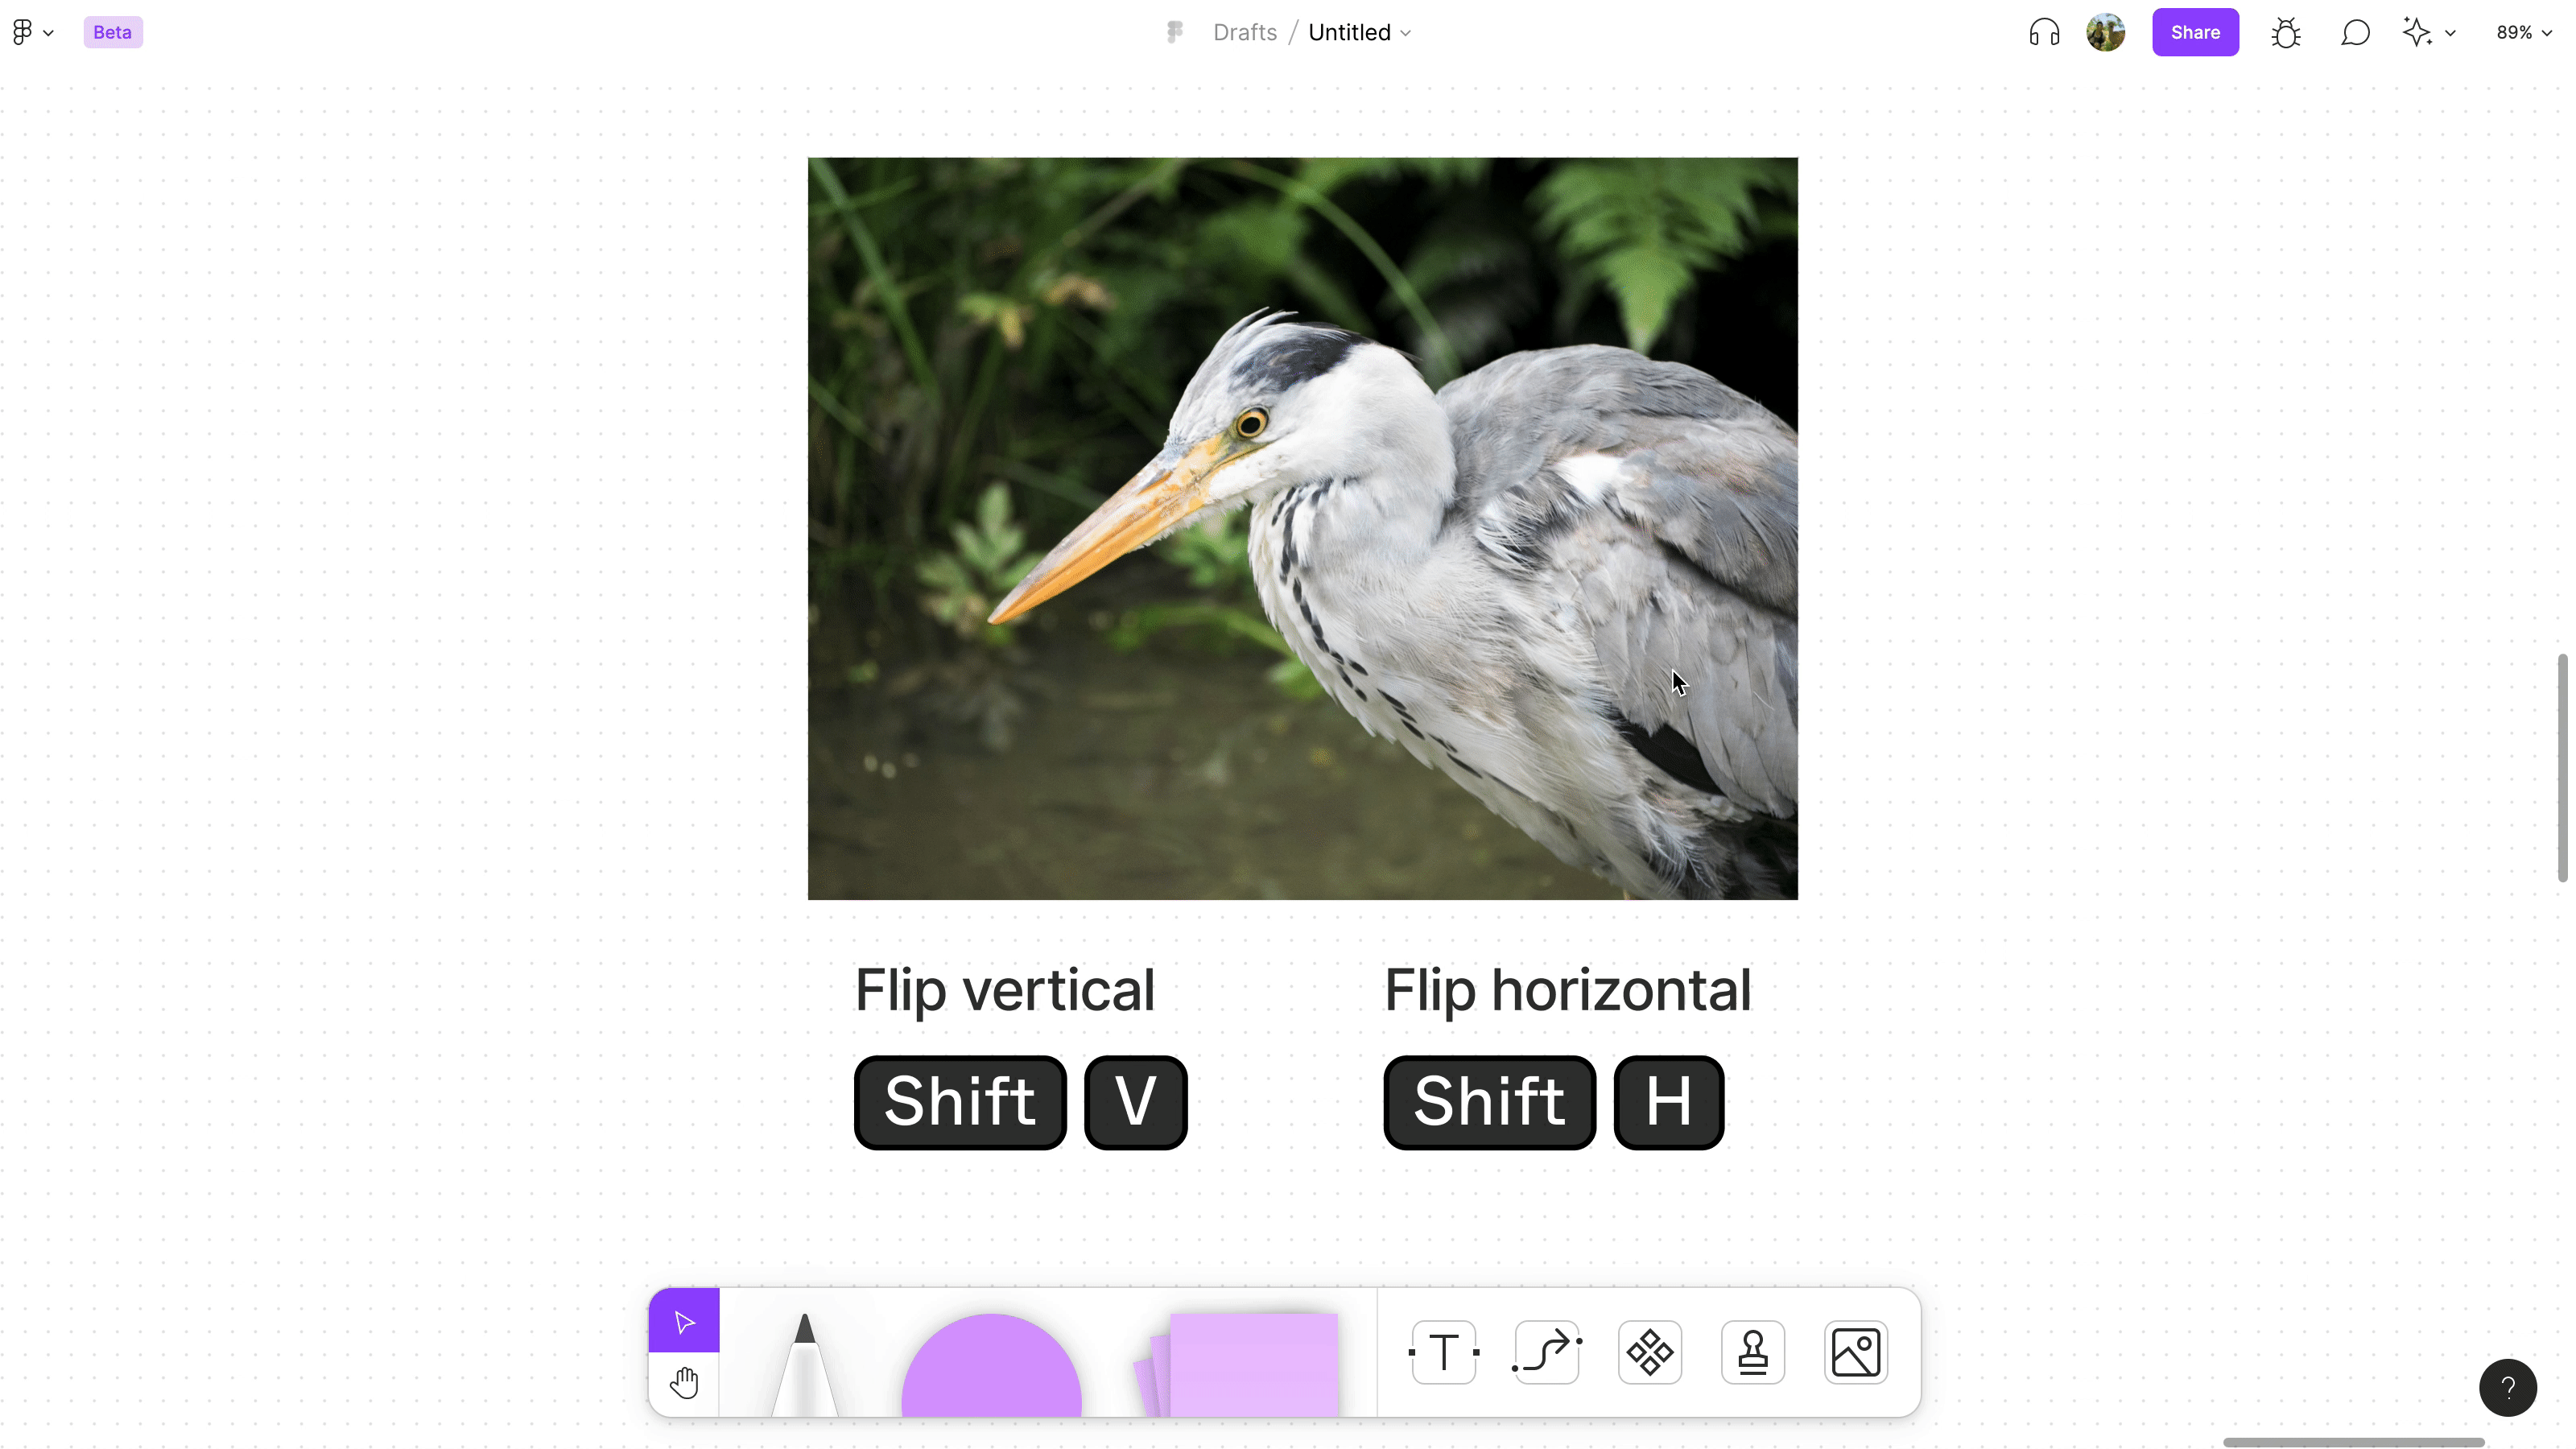 Using shortcuts to flip an image of a bird vertically and horizontally